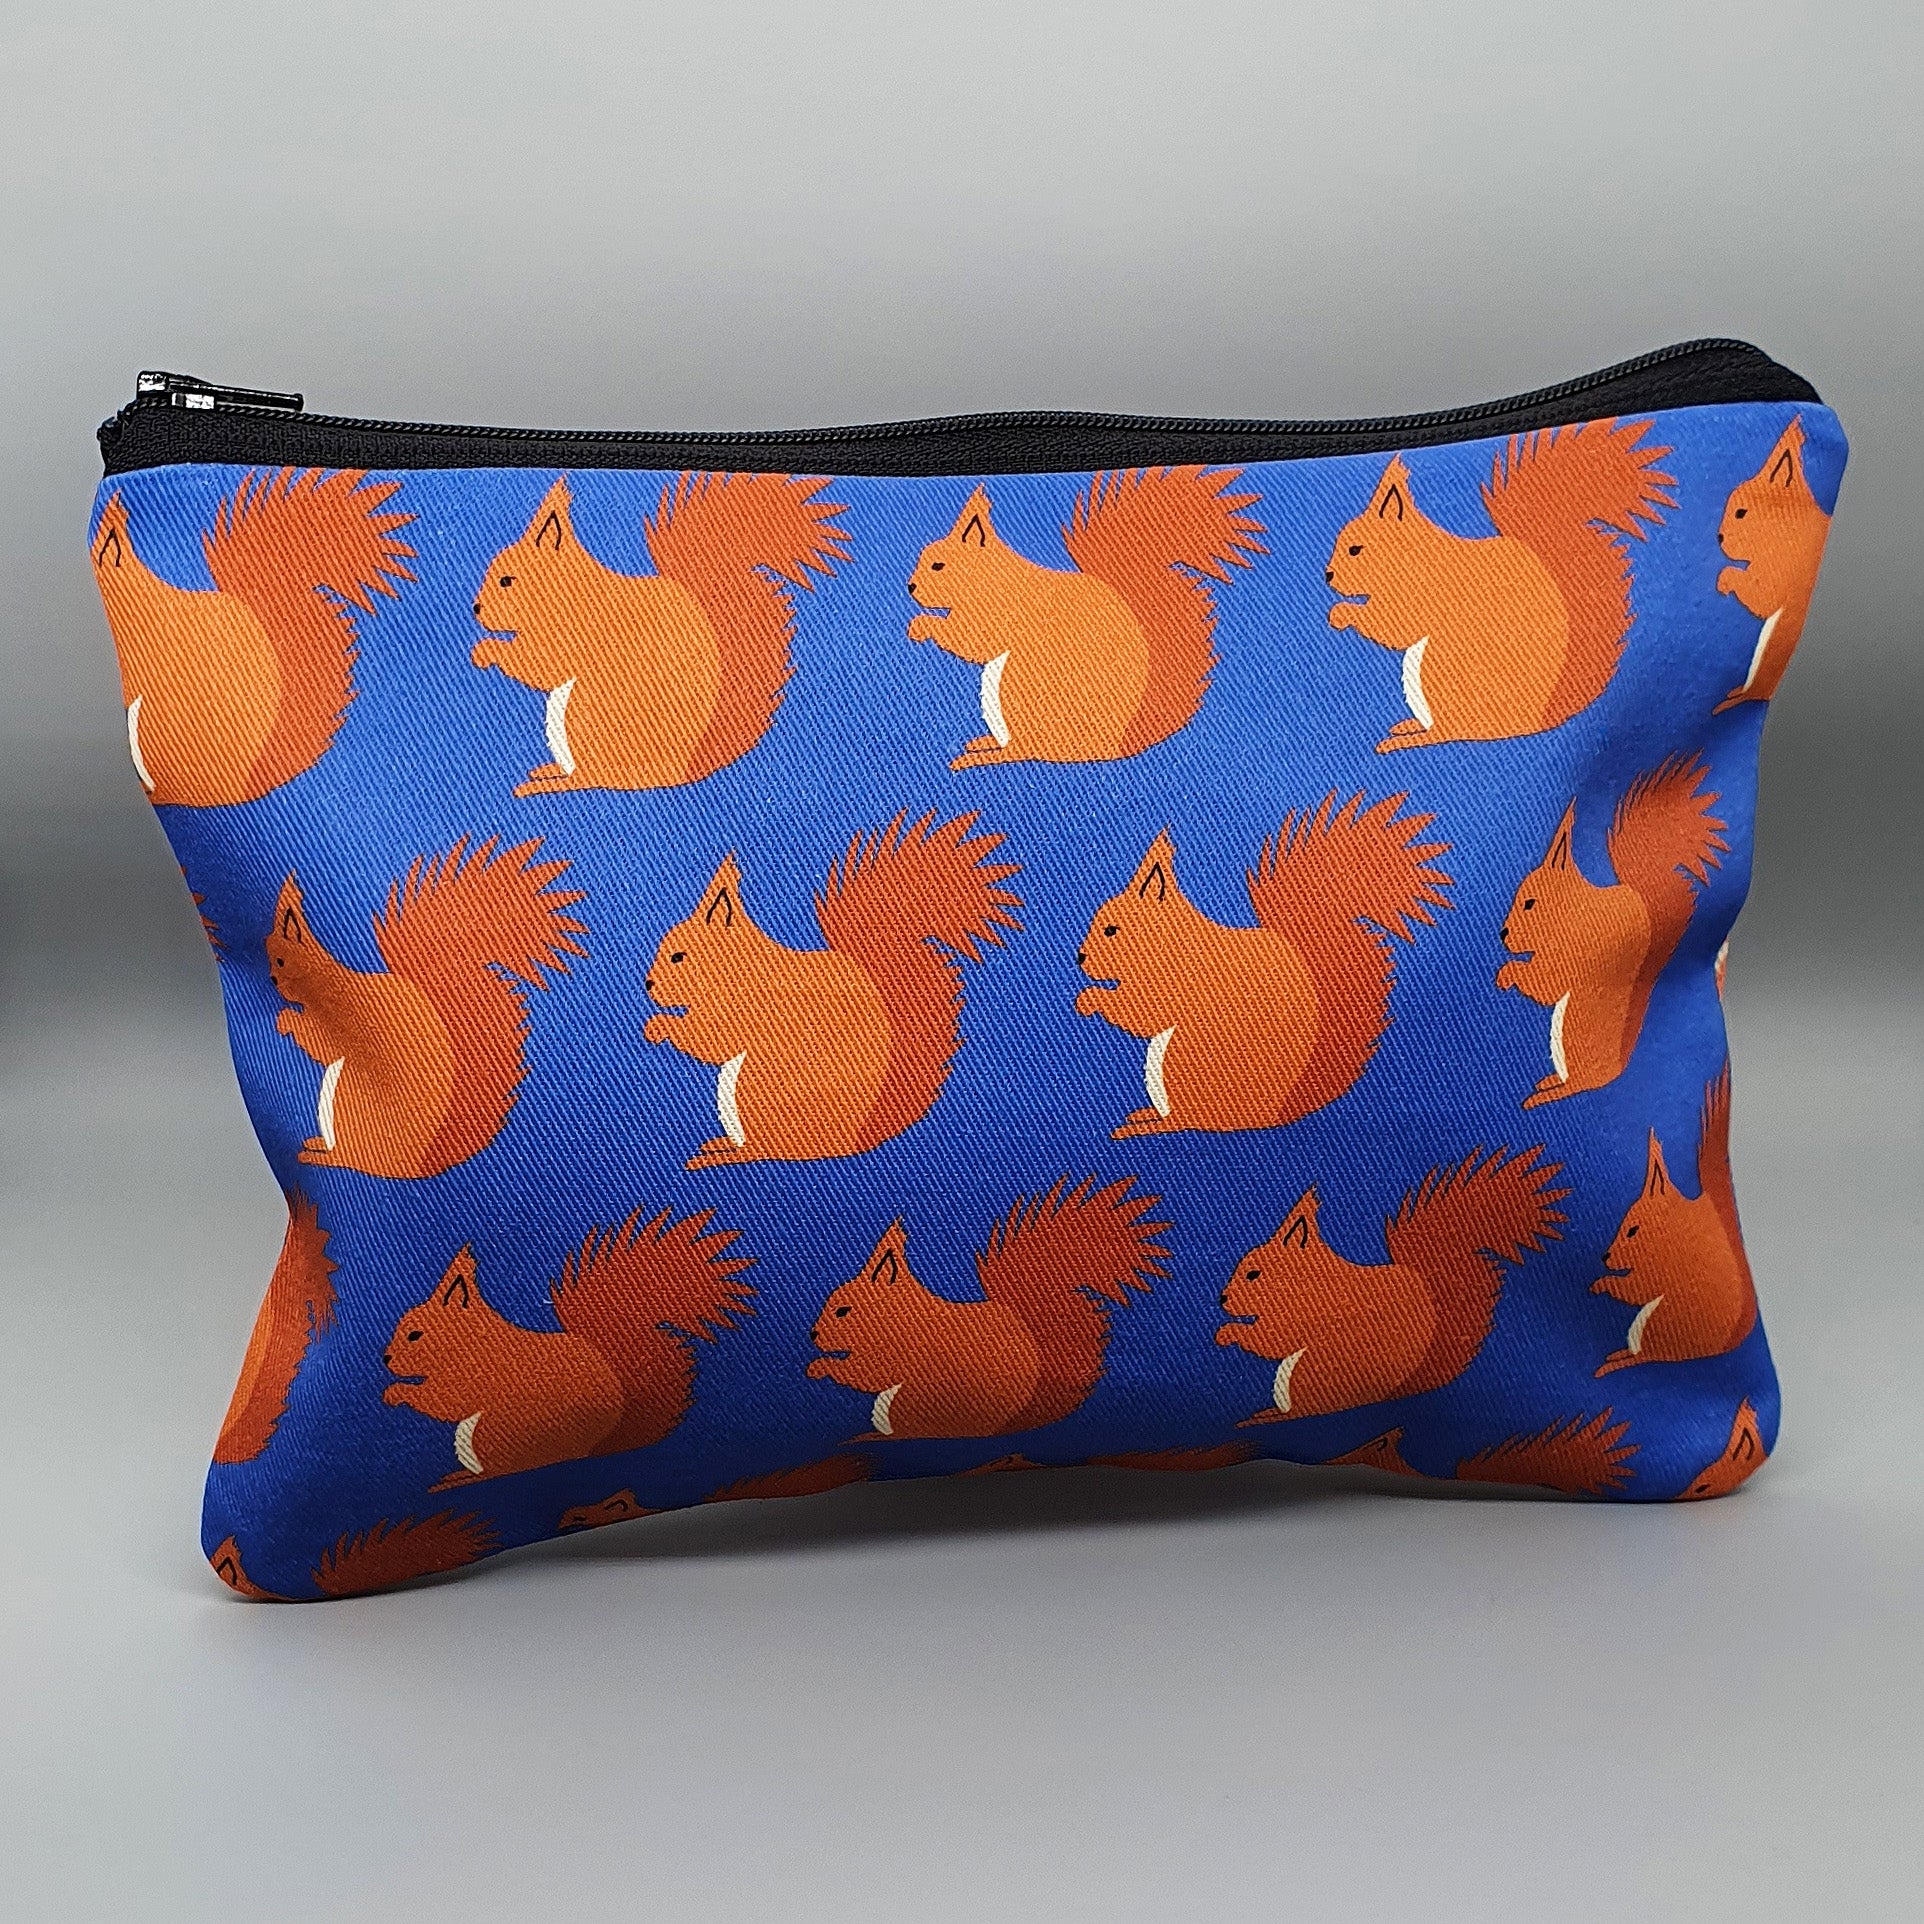 Red Squirrel Accessories/make-up bag